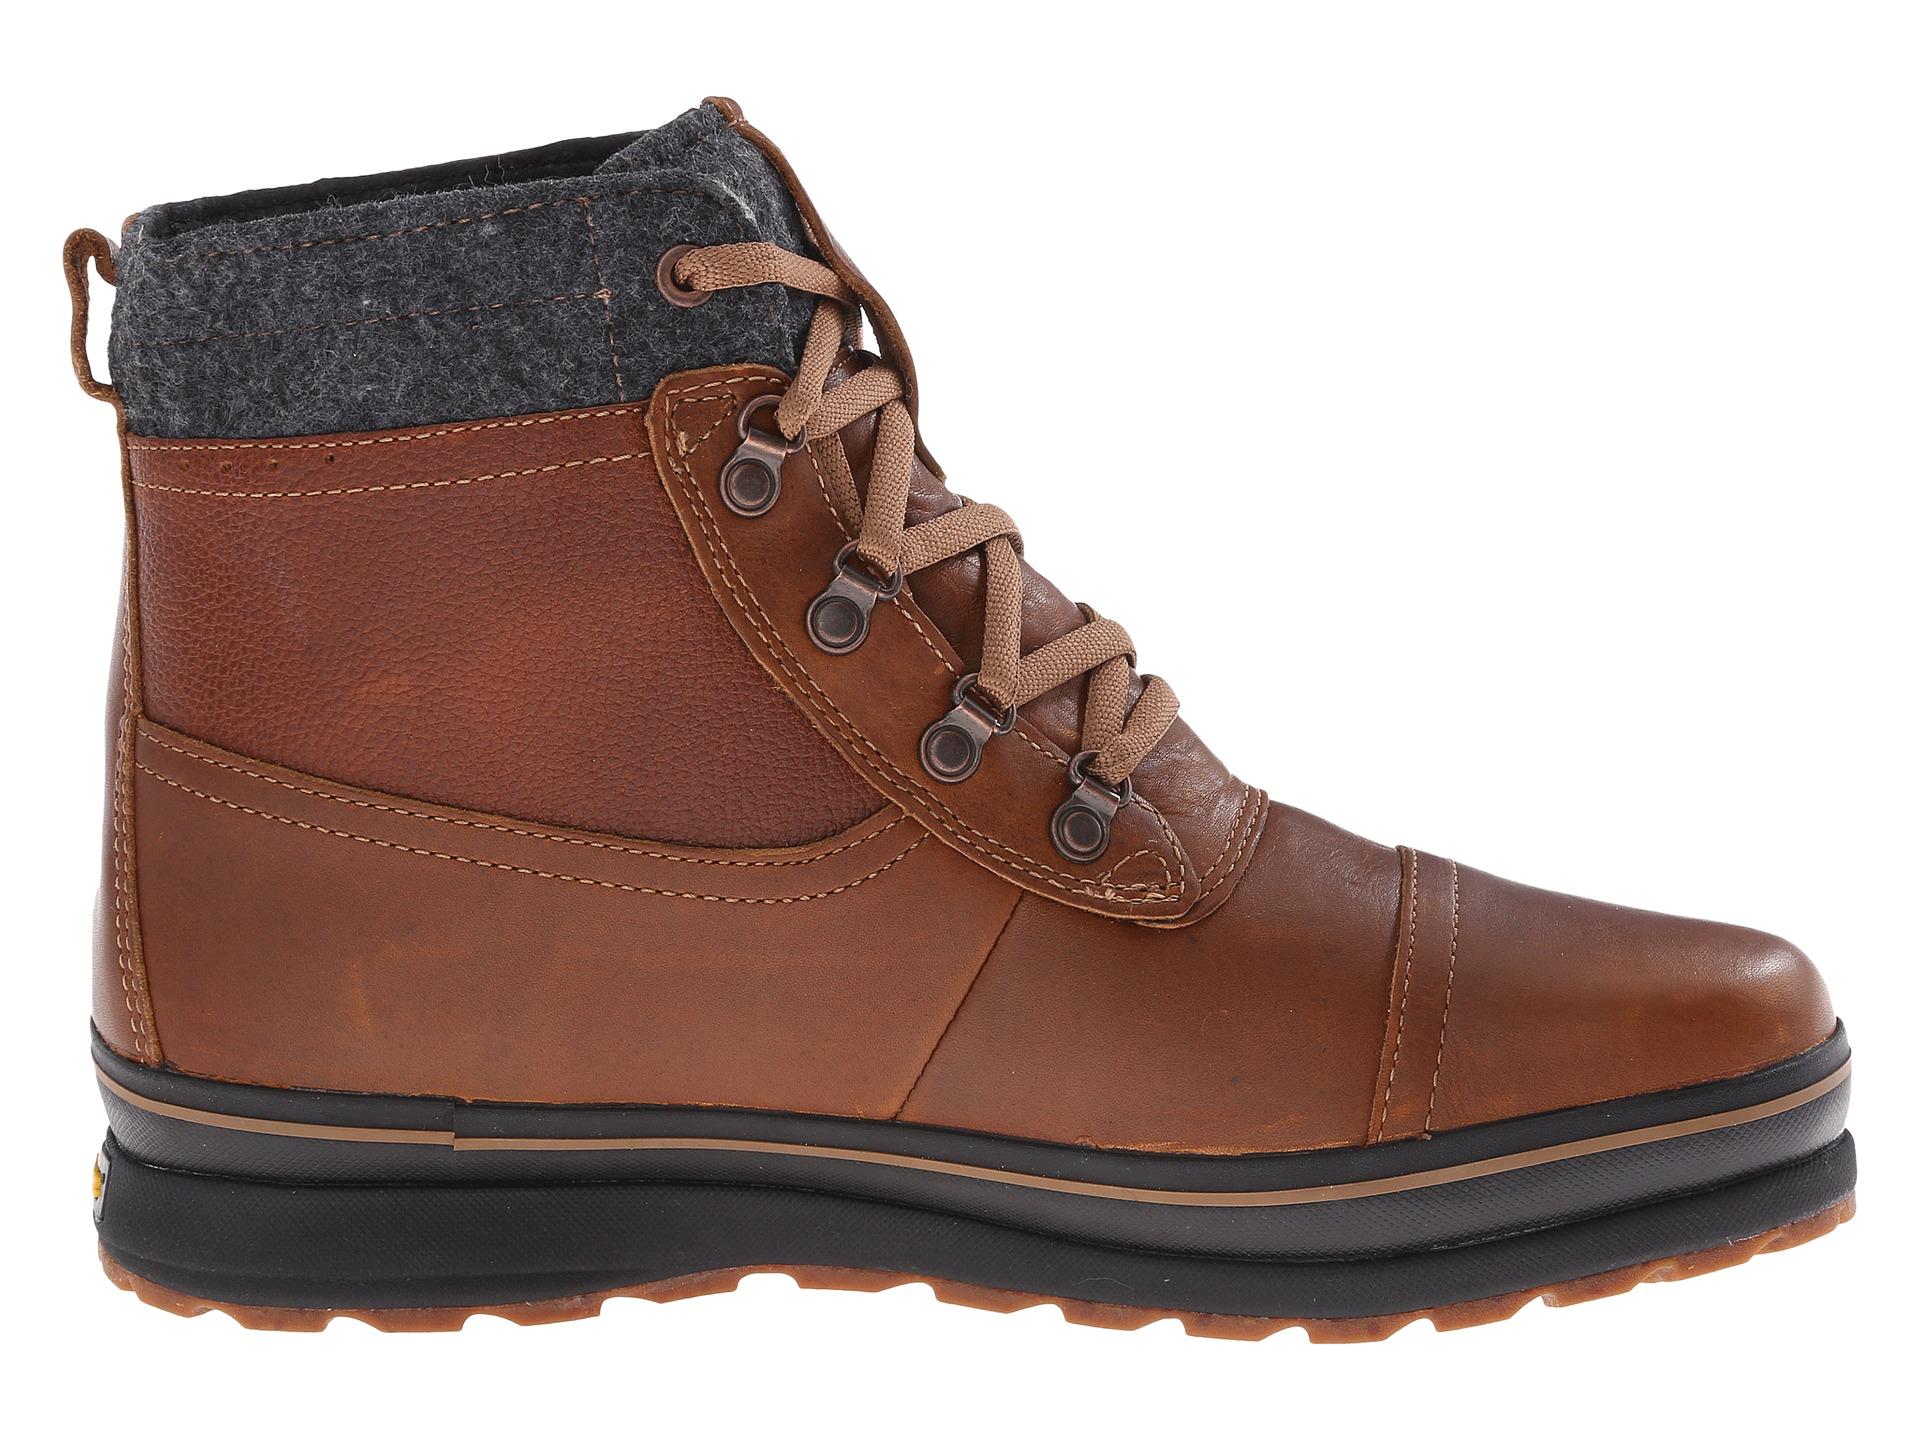 Timberland Heritage 6-inch Washed Leather Boots in Brown for Men - Lyst